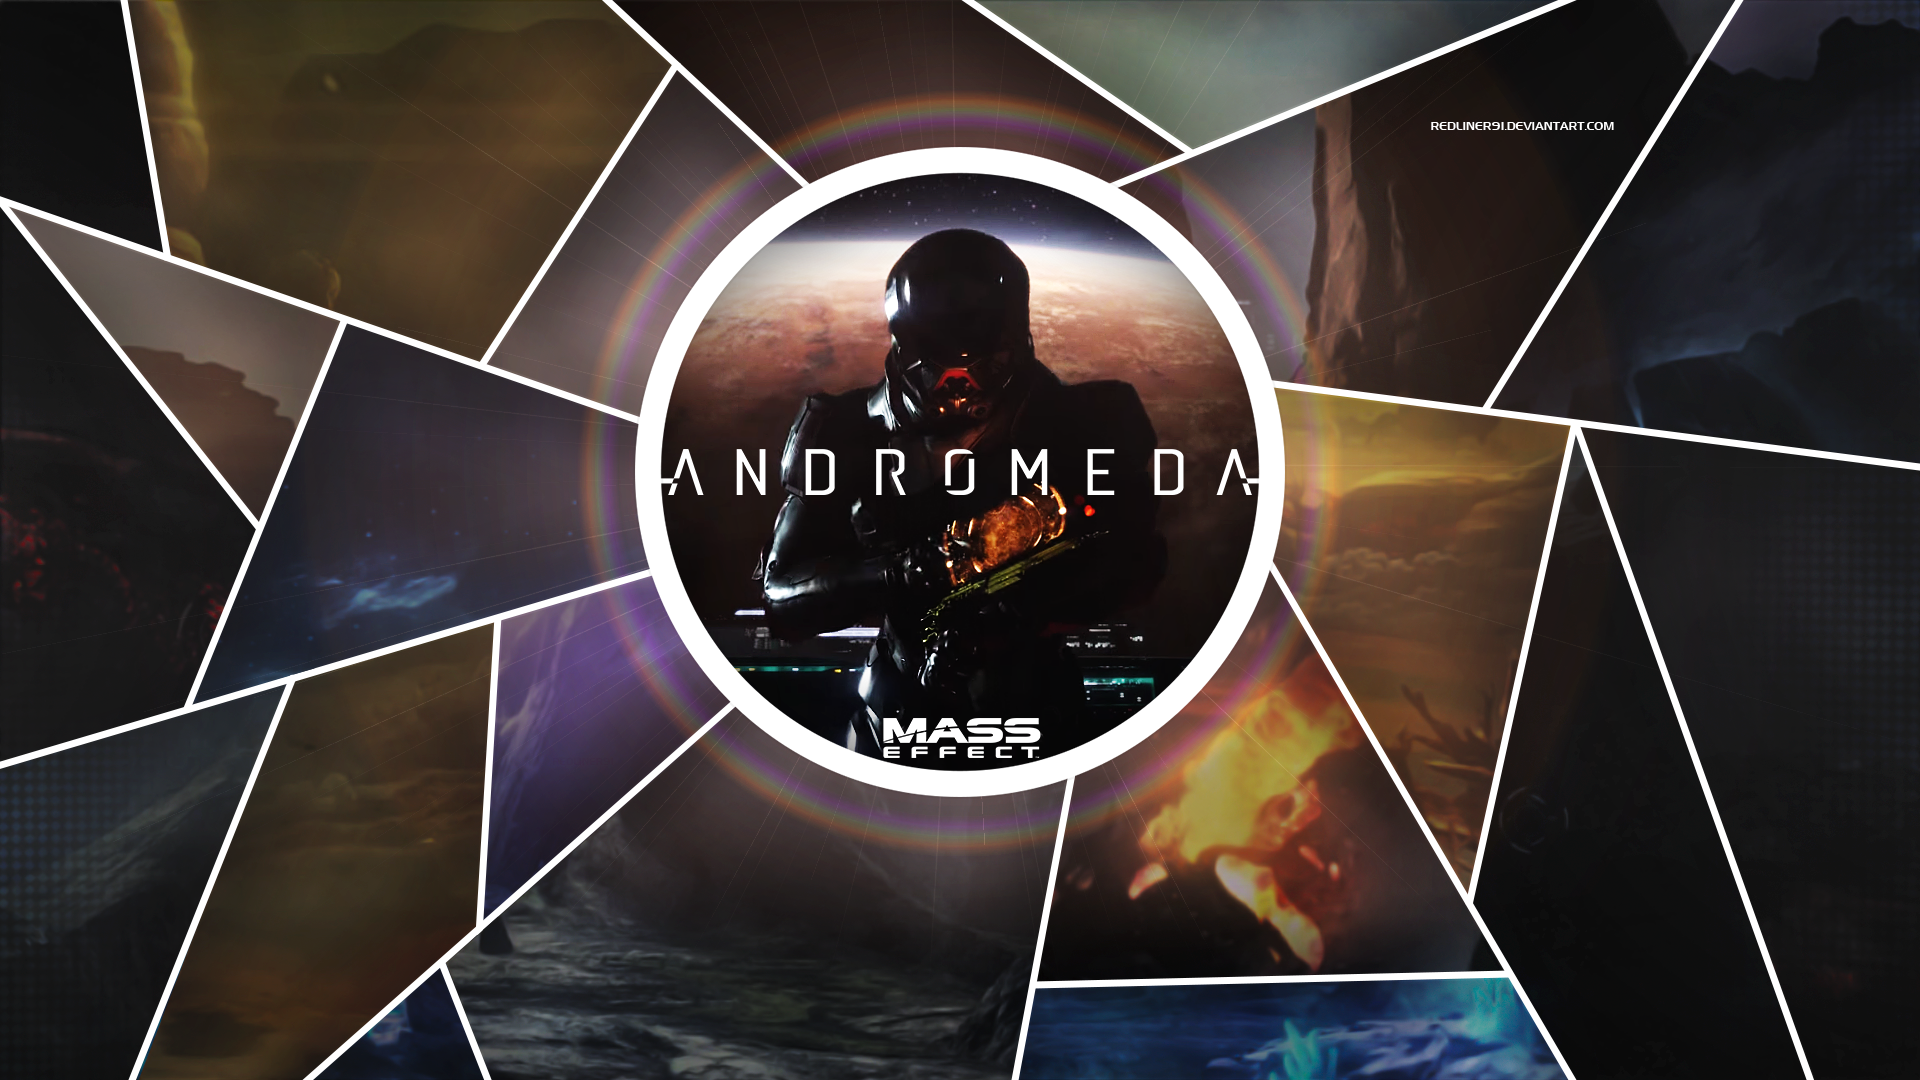 Mass Effect Andromeda Wallpapers Iphone Gadget And Pc Wallpaper